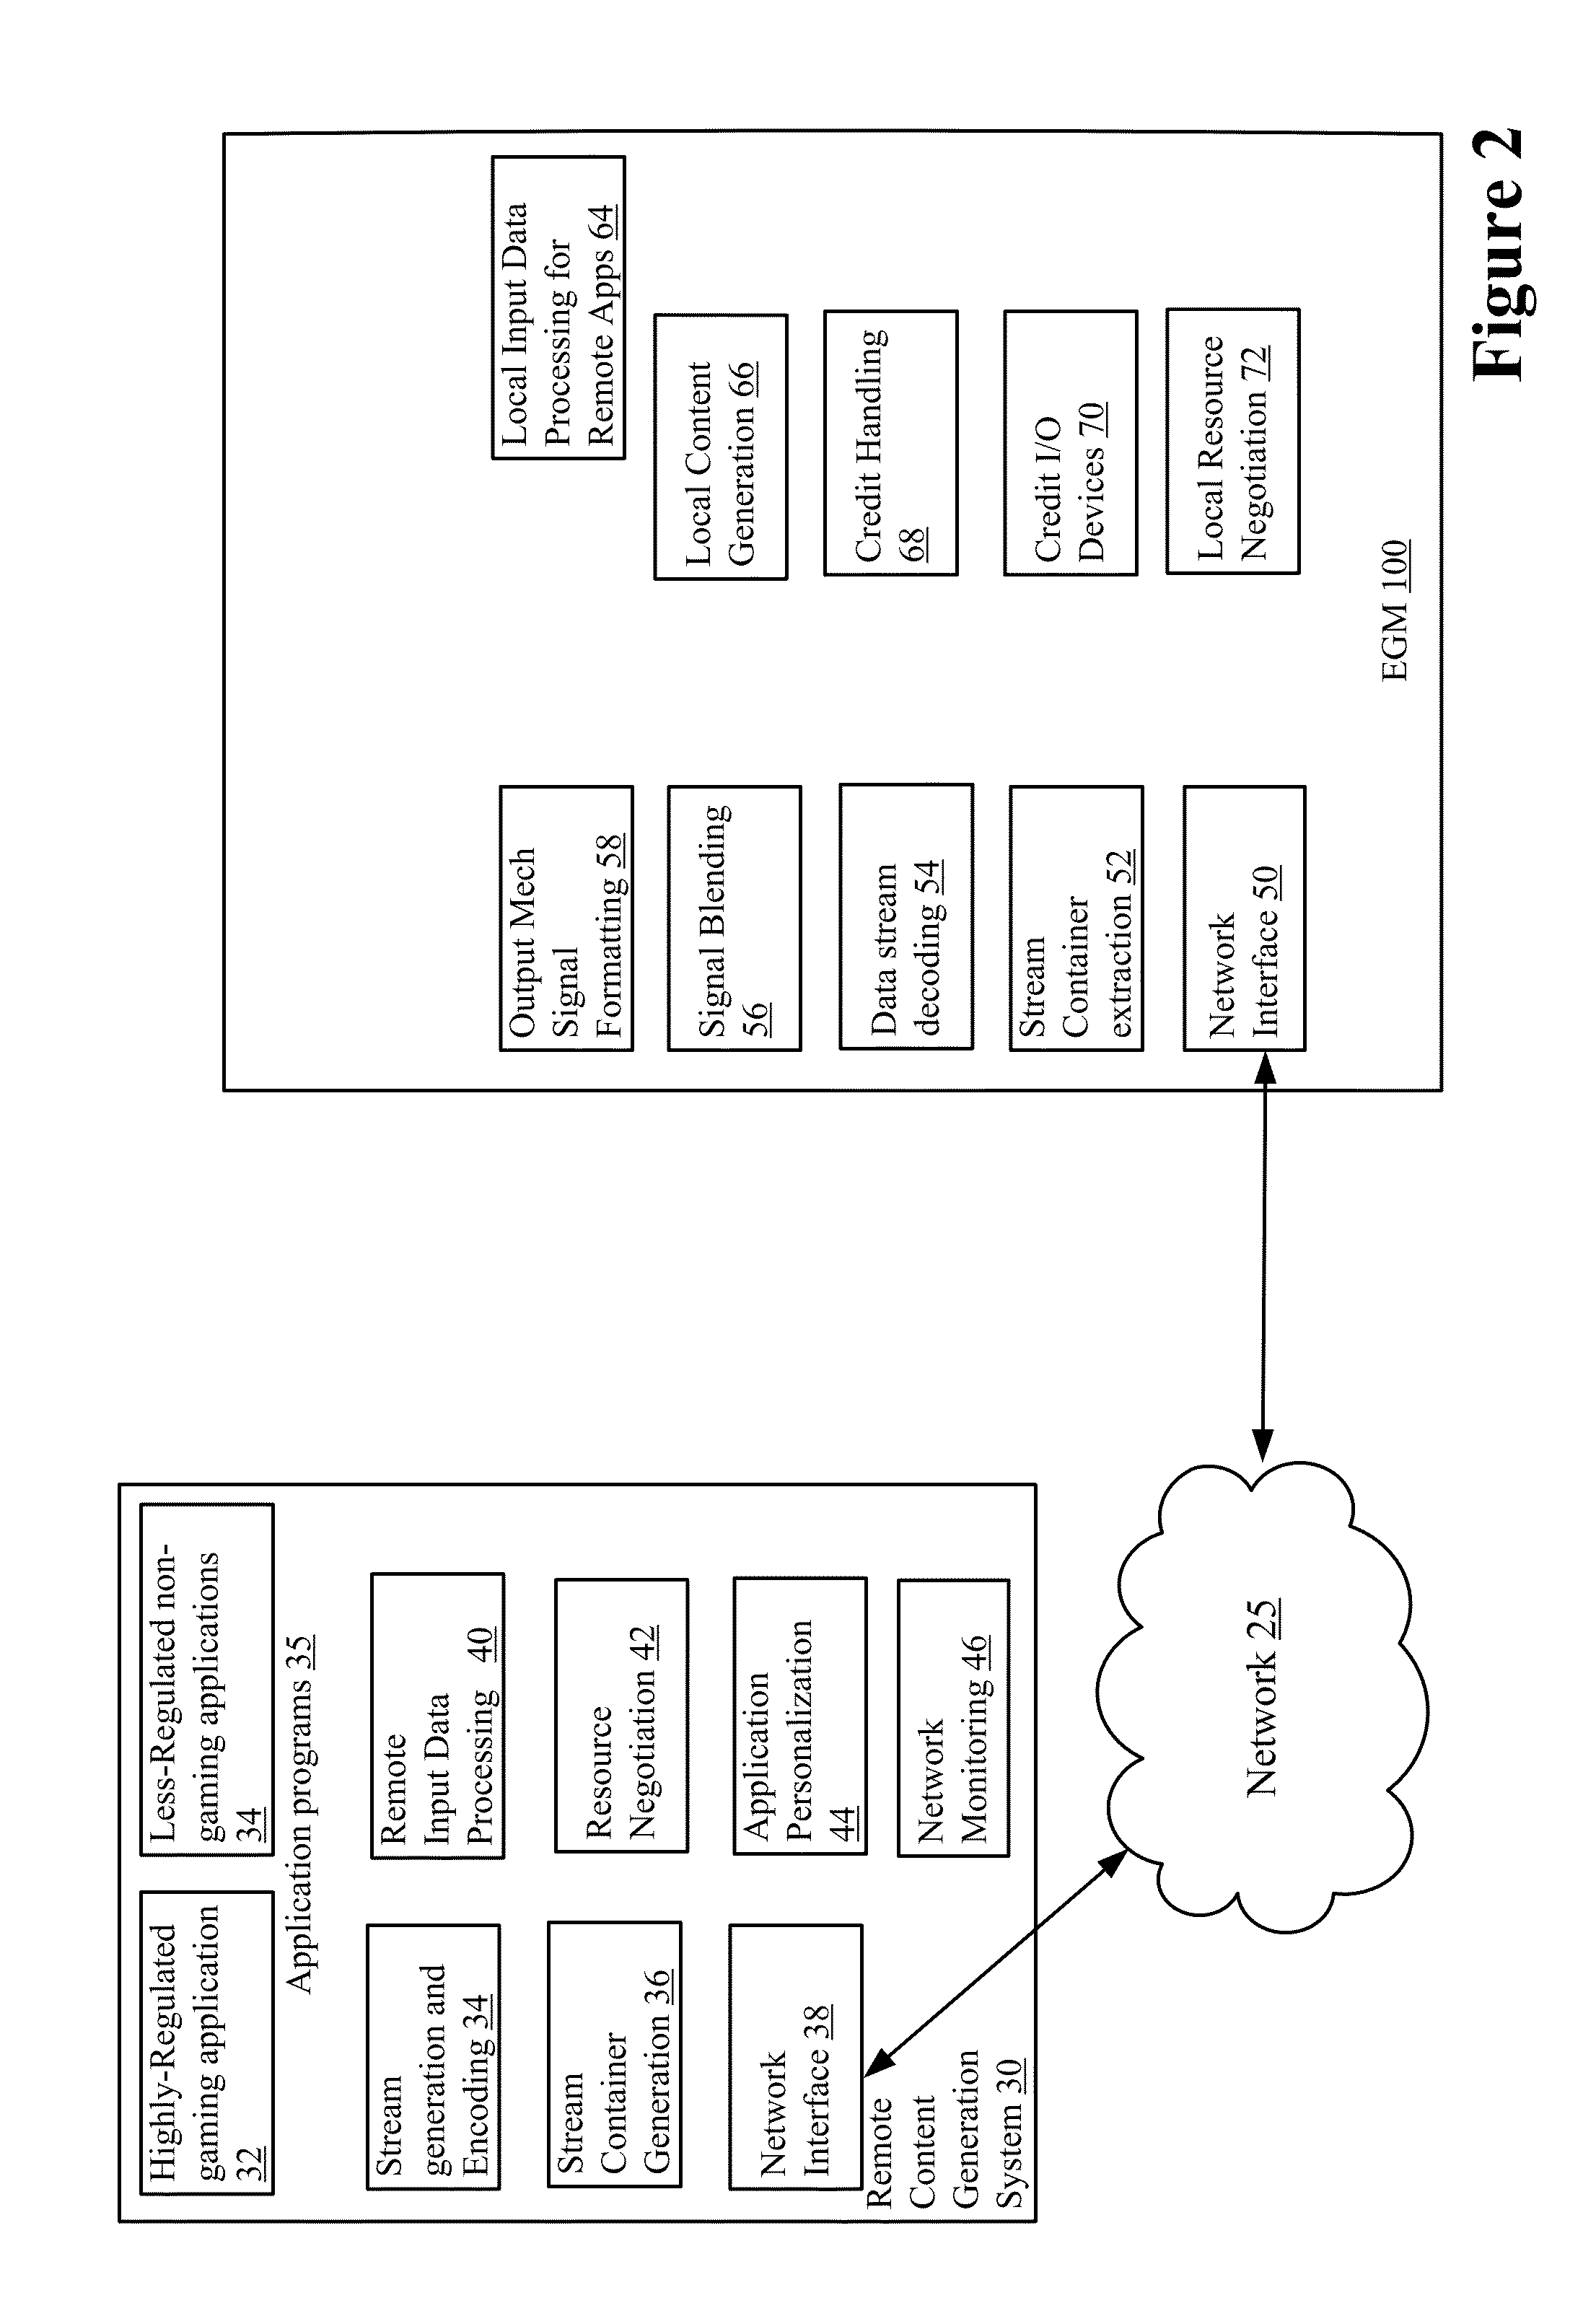 System and method for remote rendering of content on an electronic gaming machine